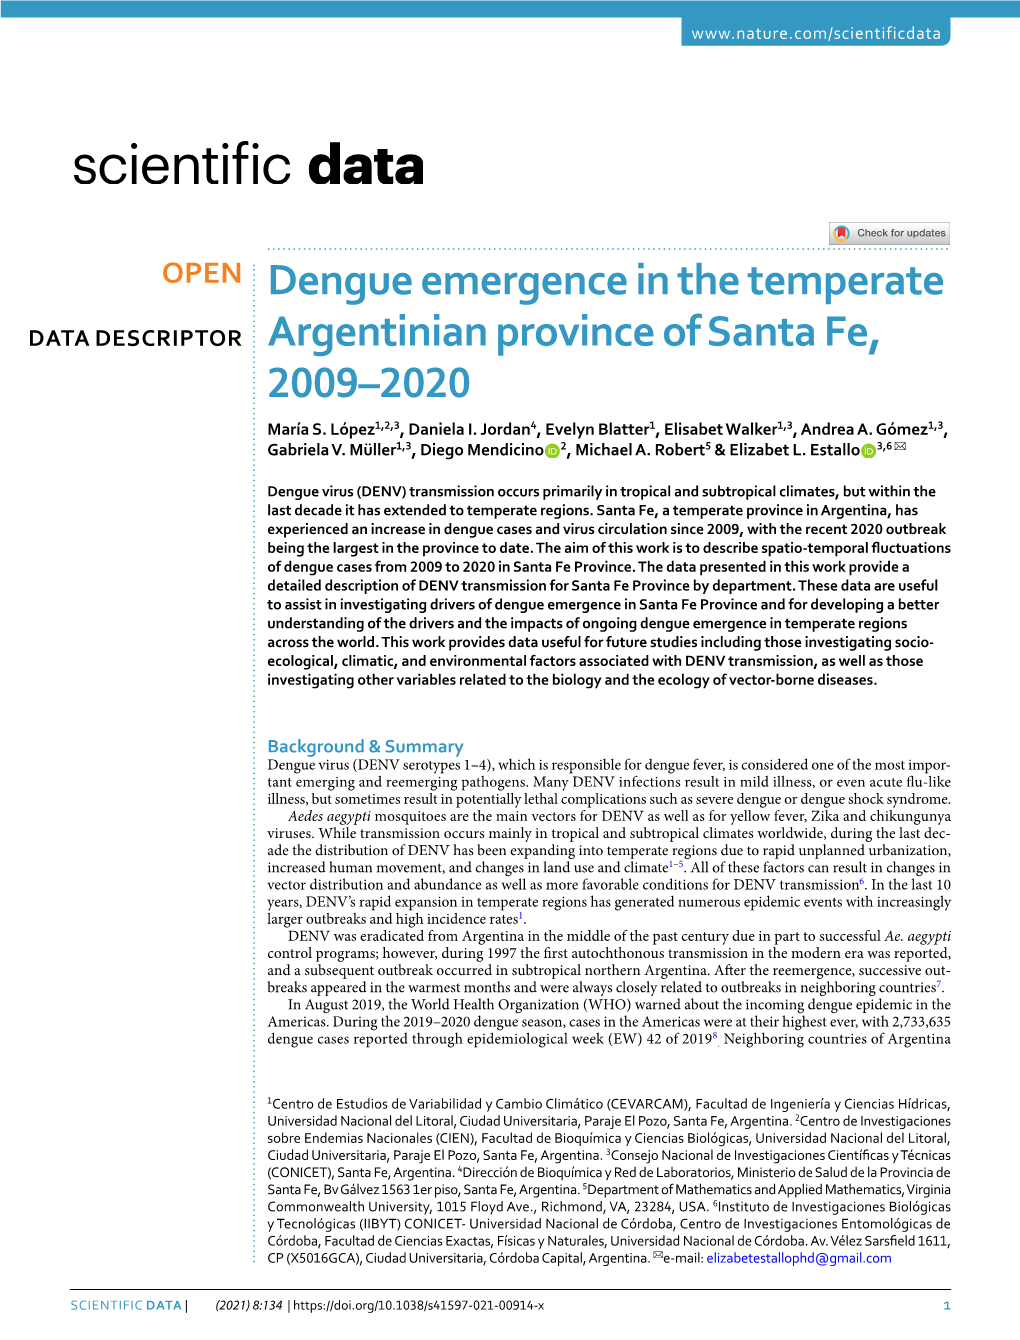 Dengue Emergence in the Temperate Argentinian Province of Santa Fe, 2009–2020